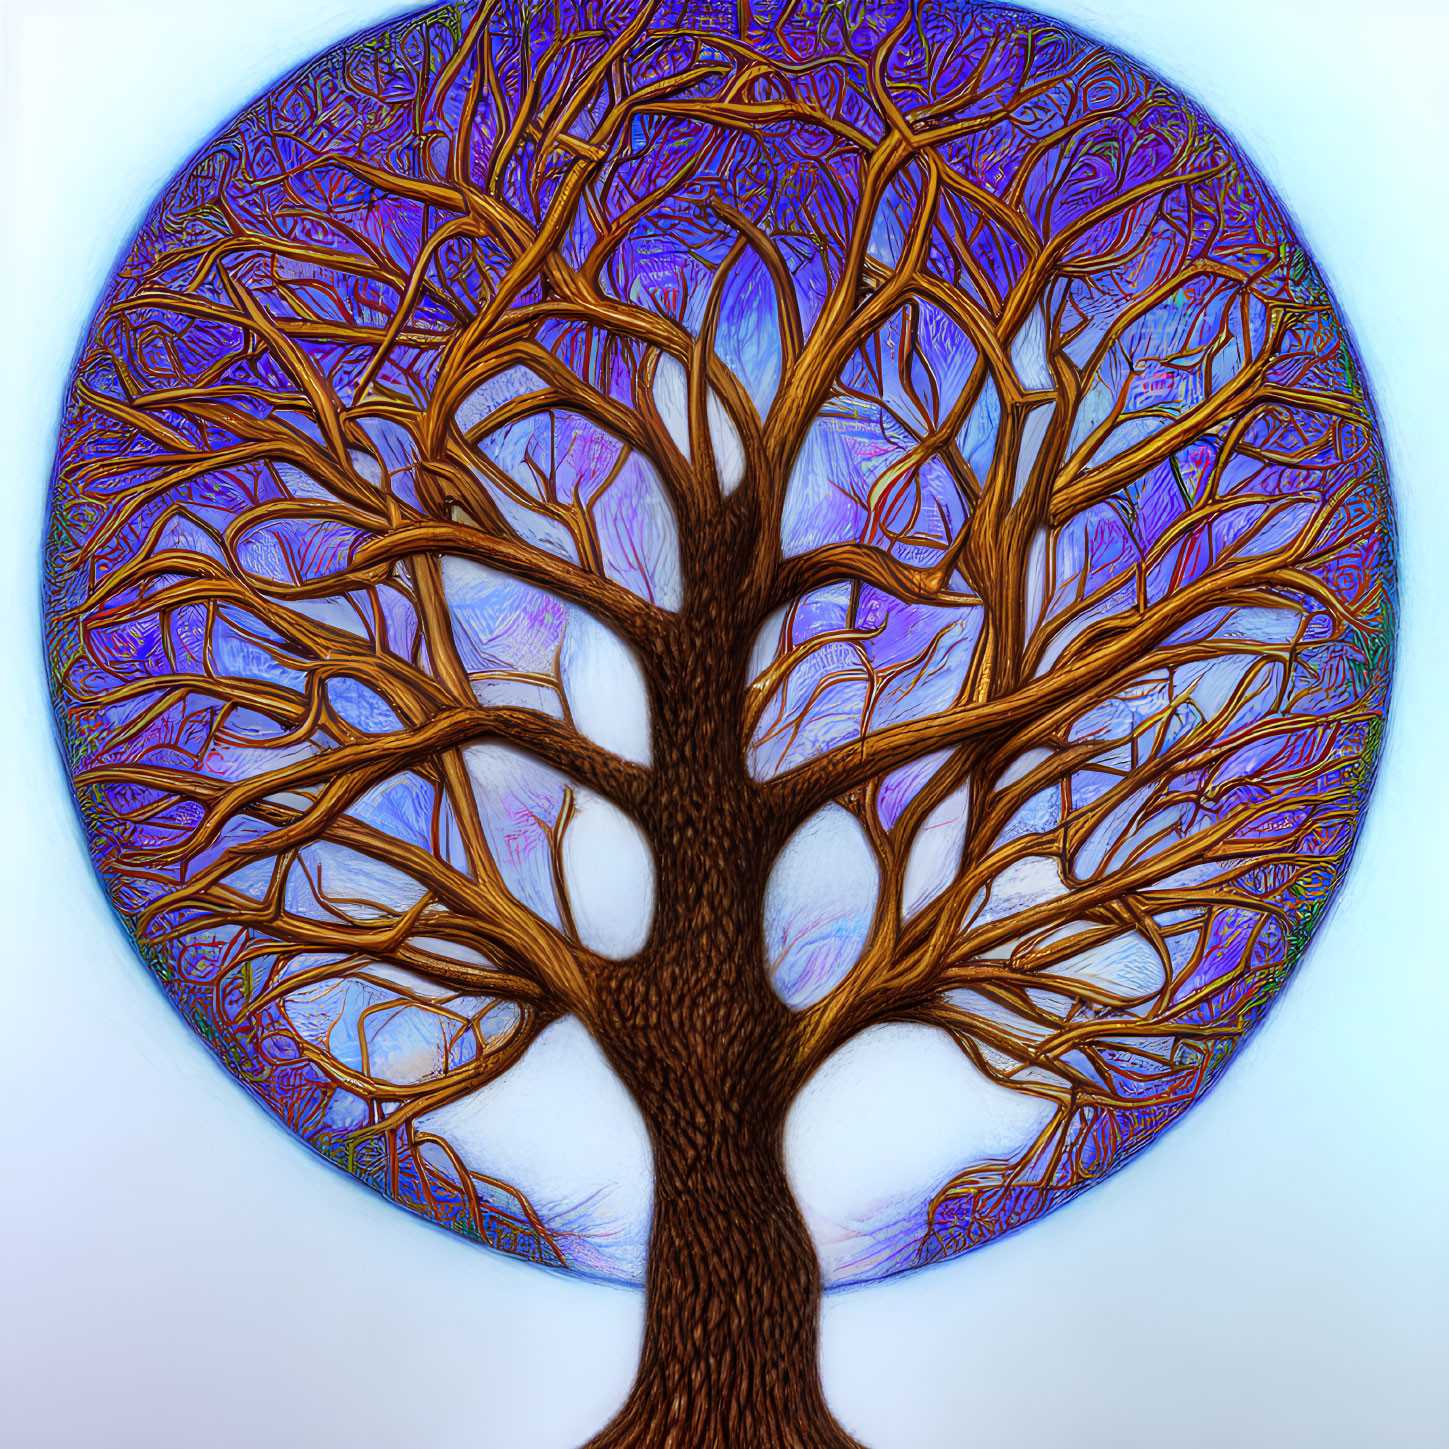 Intricately designed tree with complex branches on luminous blue background